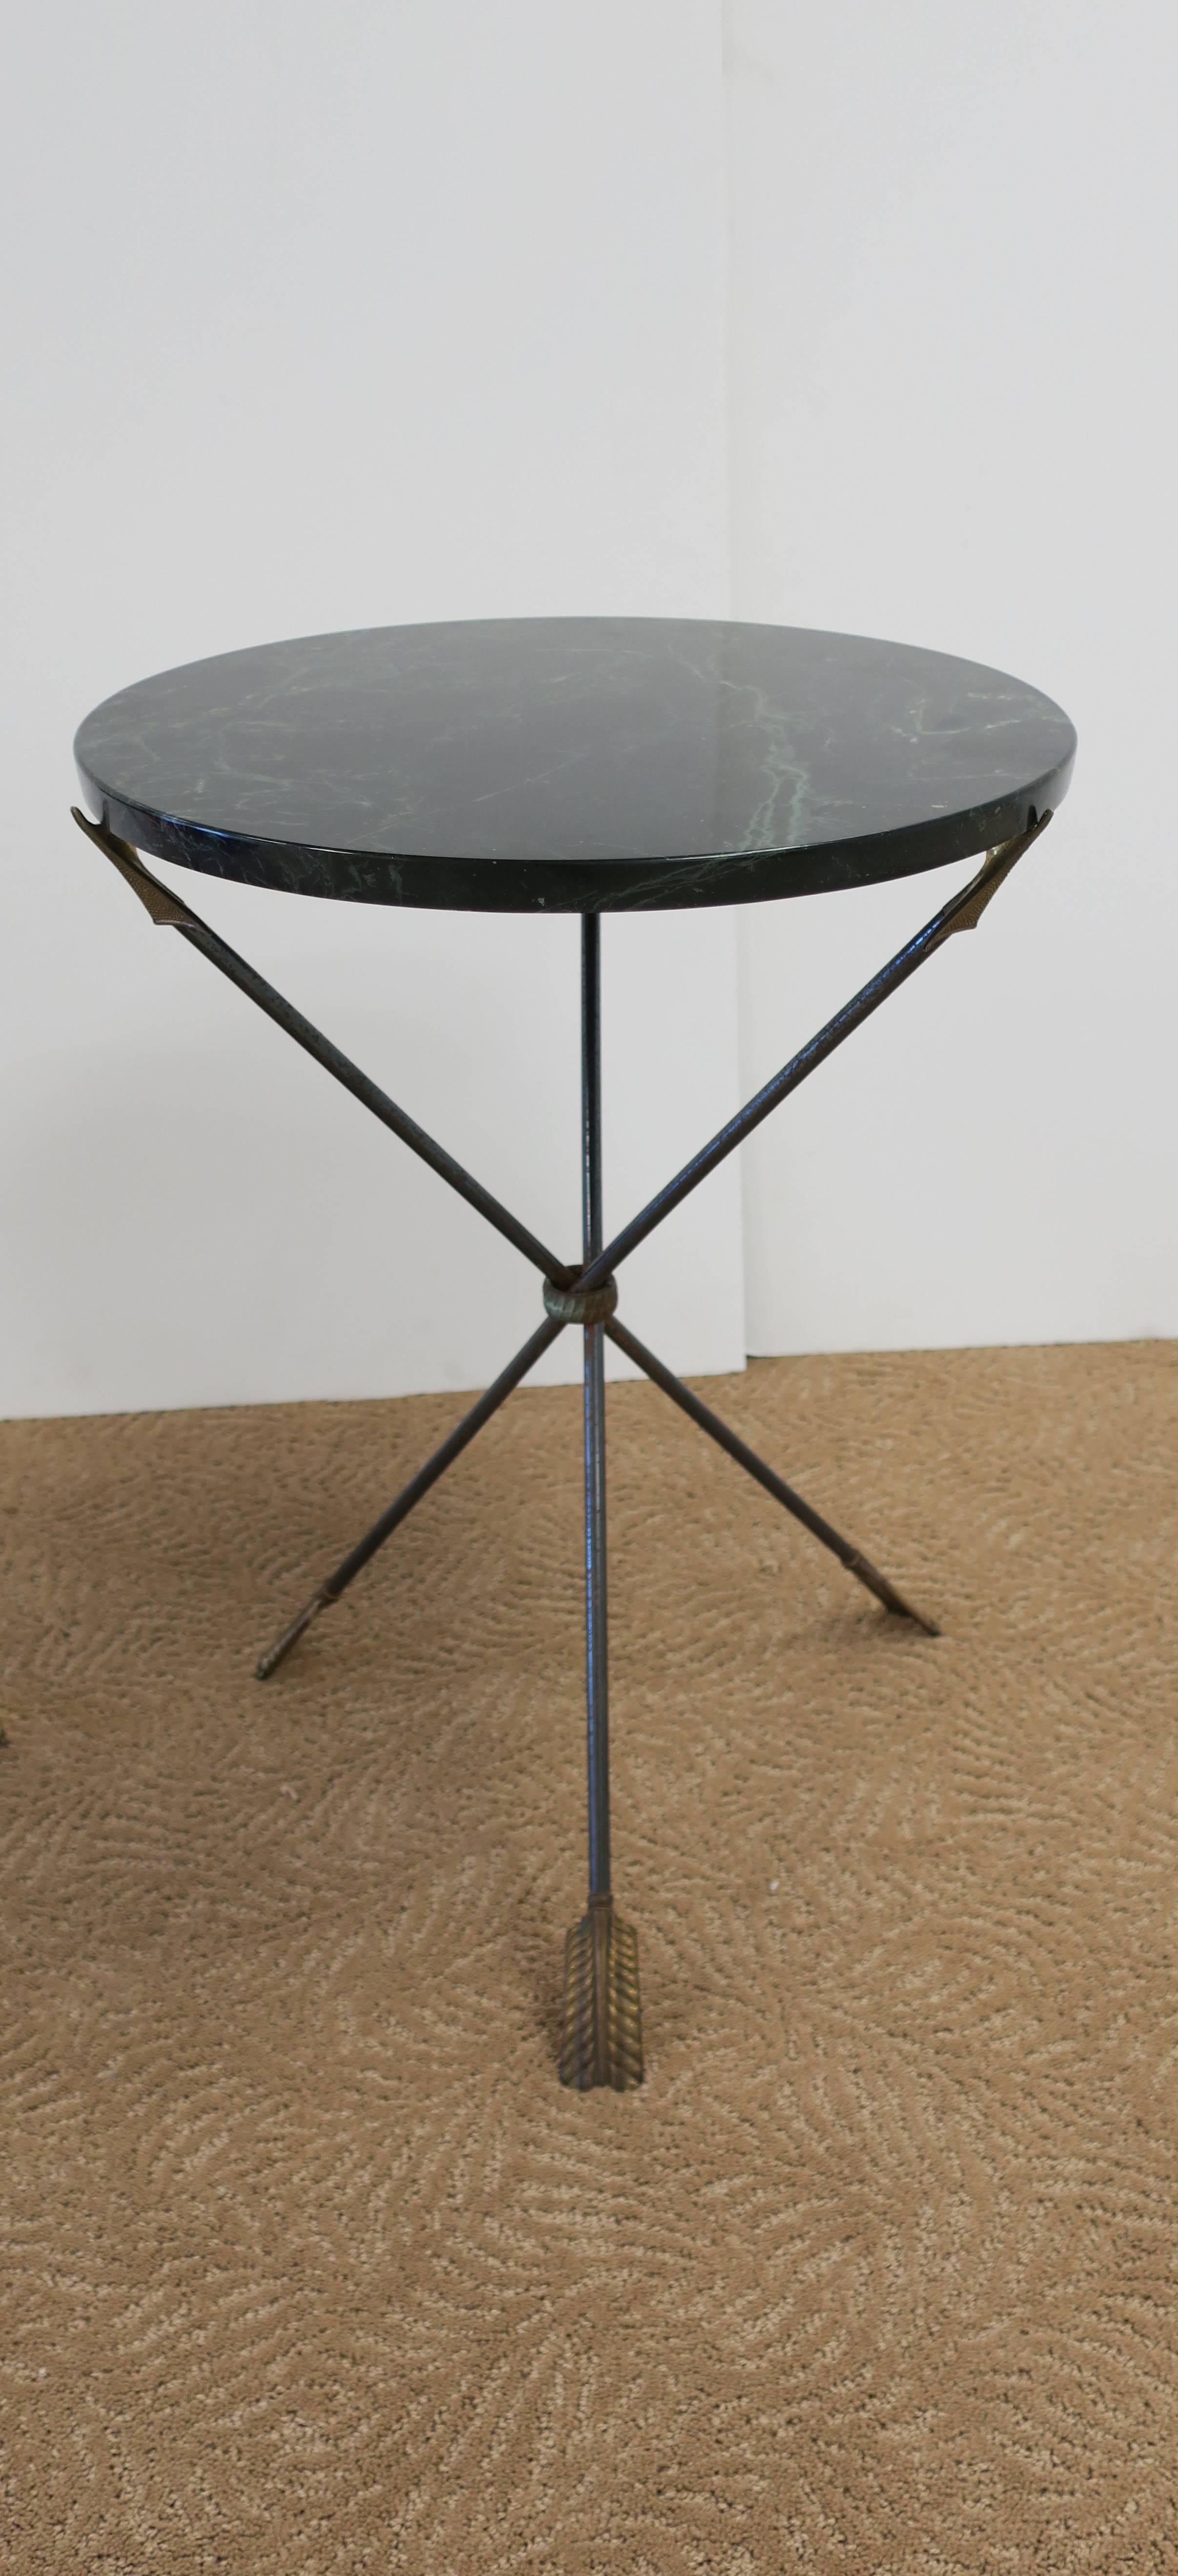 Vintage Italian Neoclassical style dark green marble top side table with tripod base. Vintage side table has a hunter green marble top, with light green and white veining, with traces of gold, that sits atop a tripod black enameled metal and brass